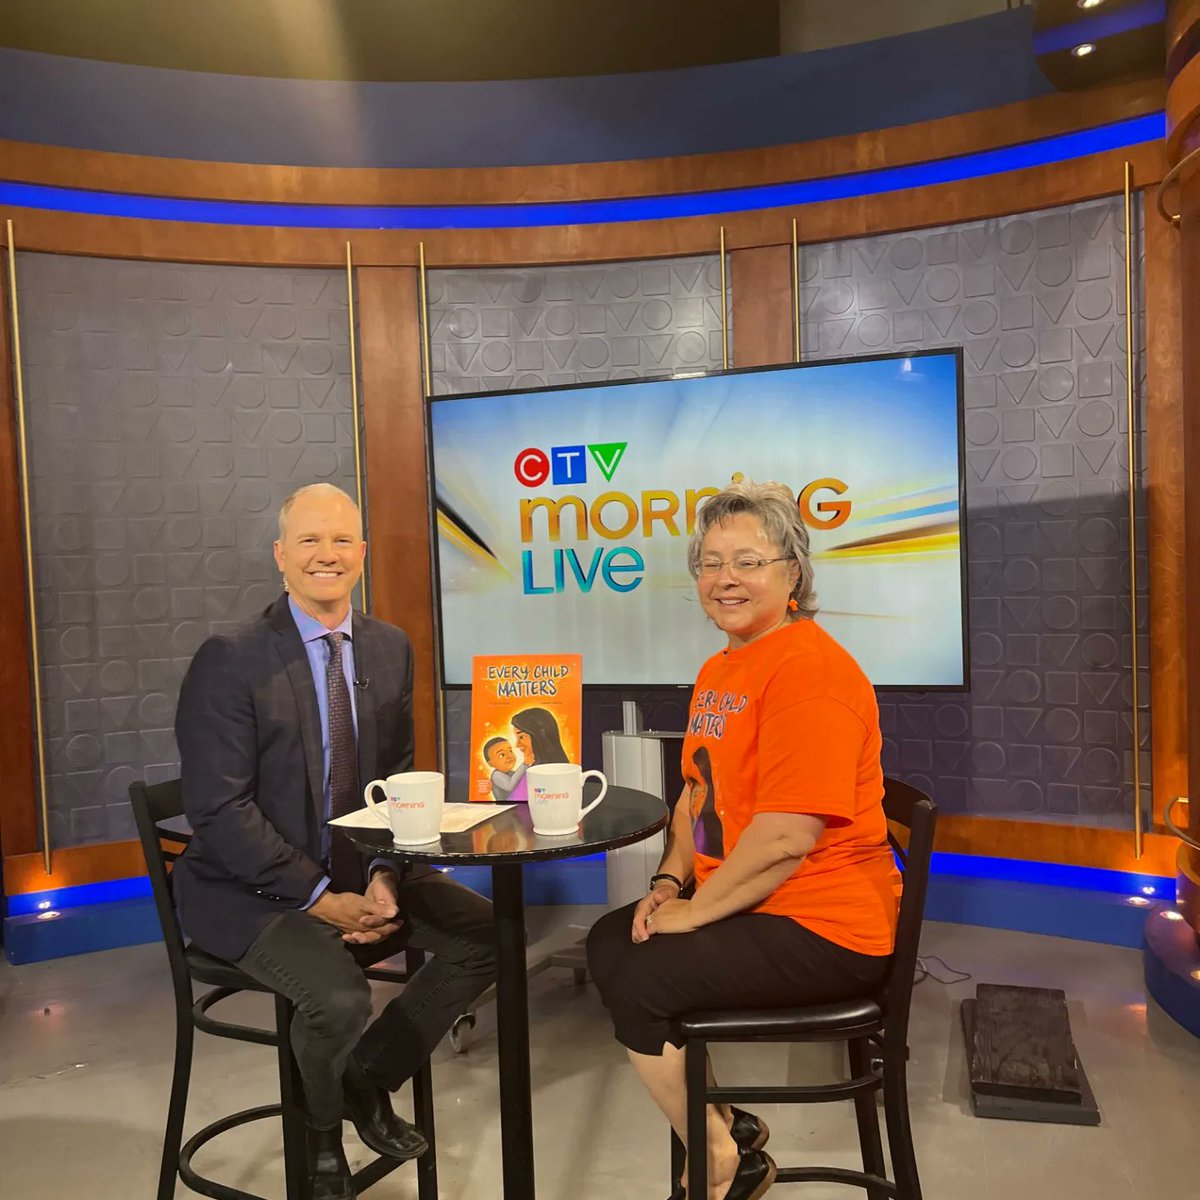 Phyllis Webstad from Orange Shirt Society was talking about her new book on CTV Calgary news with Jefferson Humphreys. Such an honor to be able to speak with CTV News.